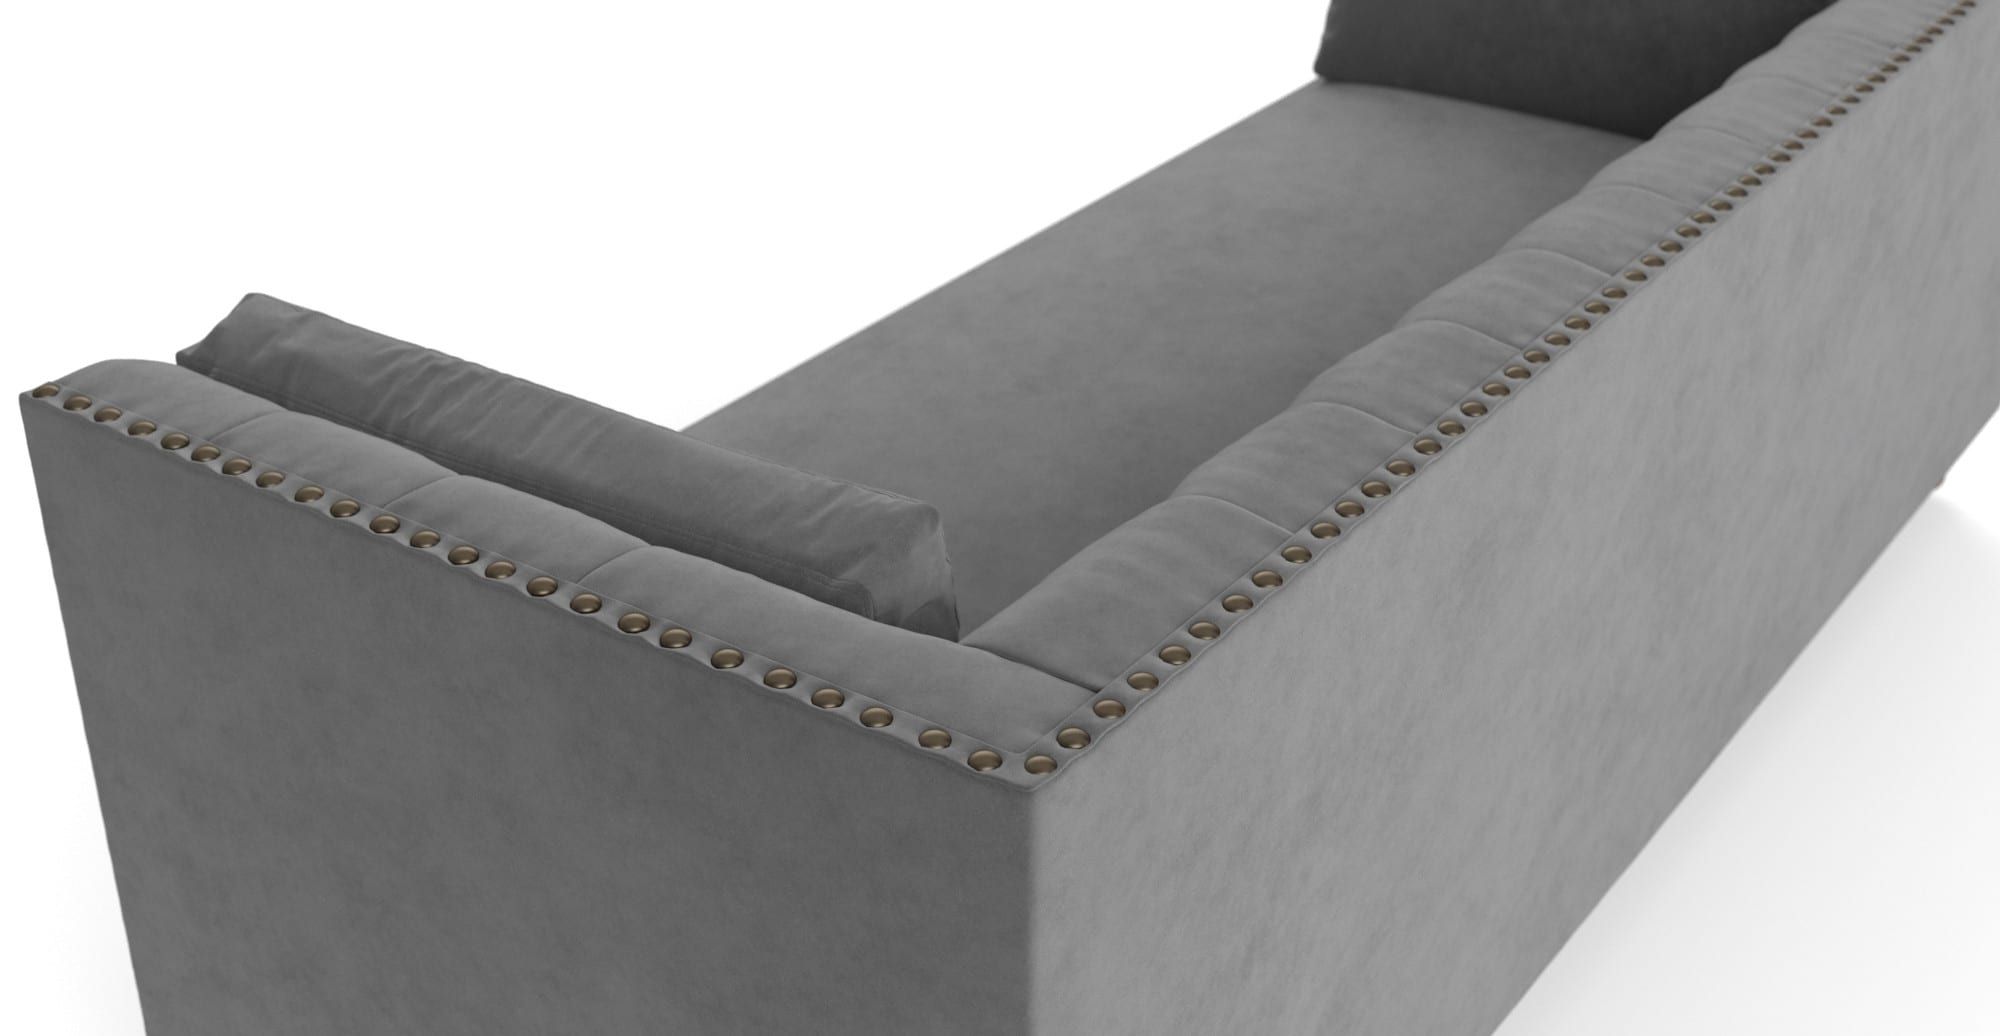 Widely Used Florence Medium Sofas Pertaining To Sofa : Florence Medium Sofas Pleasing Florence Medium Sofas (View 16 of 20)